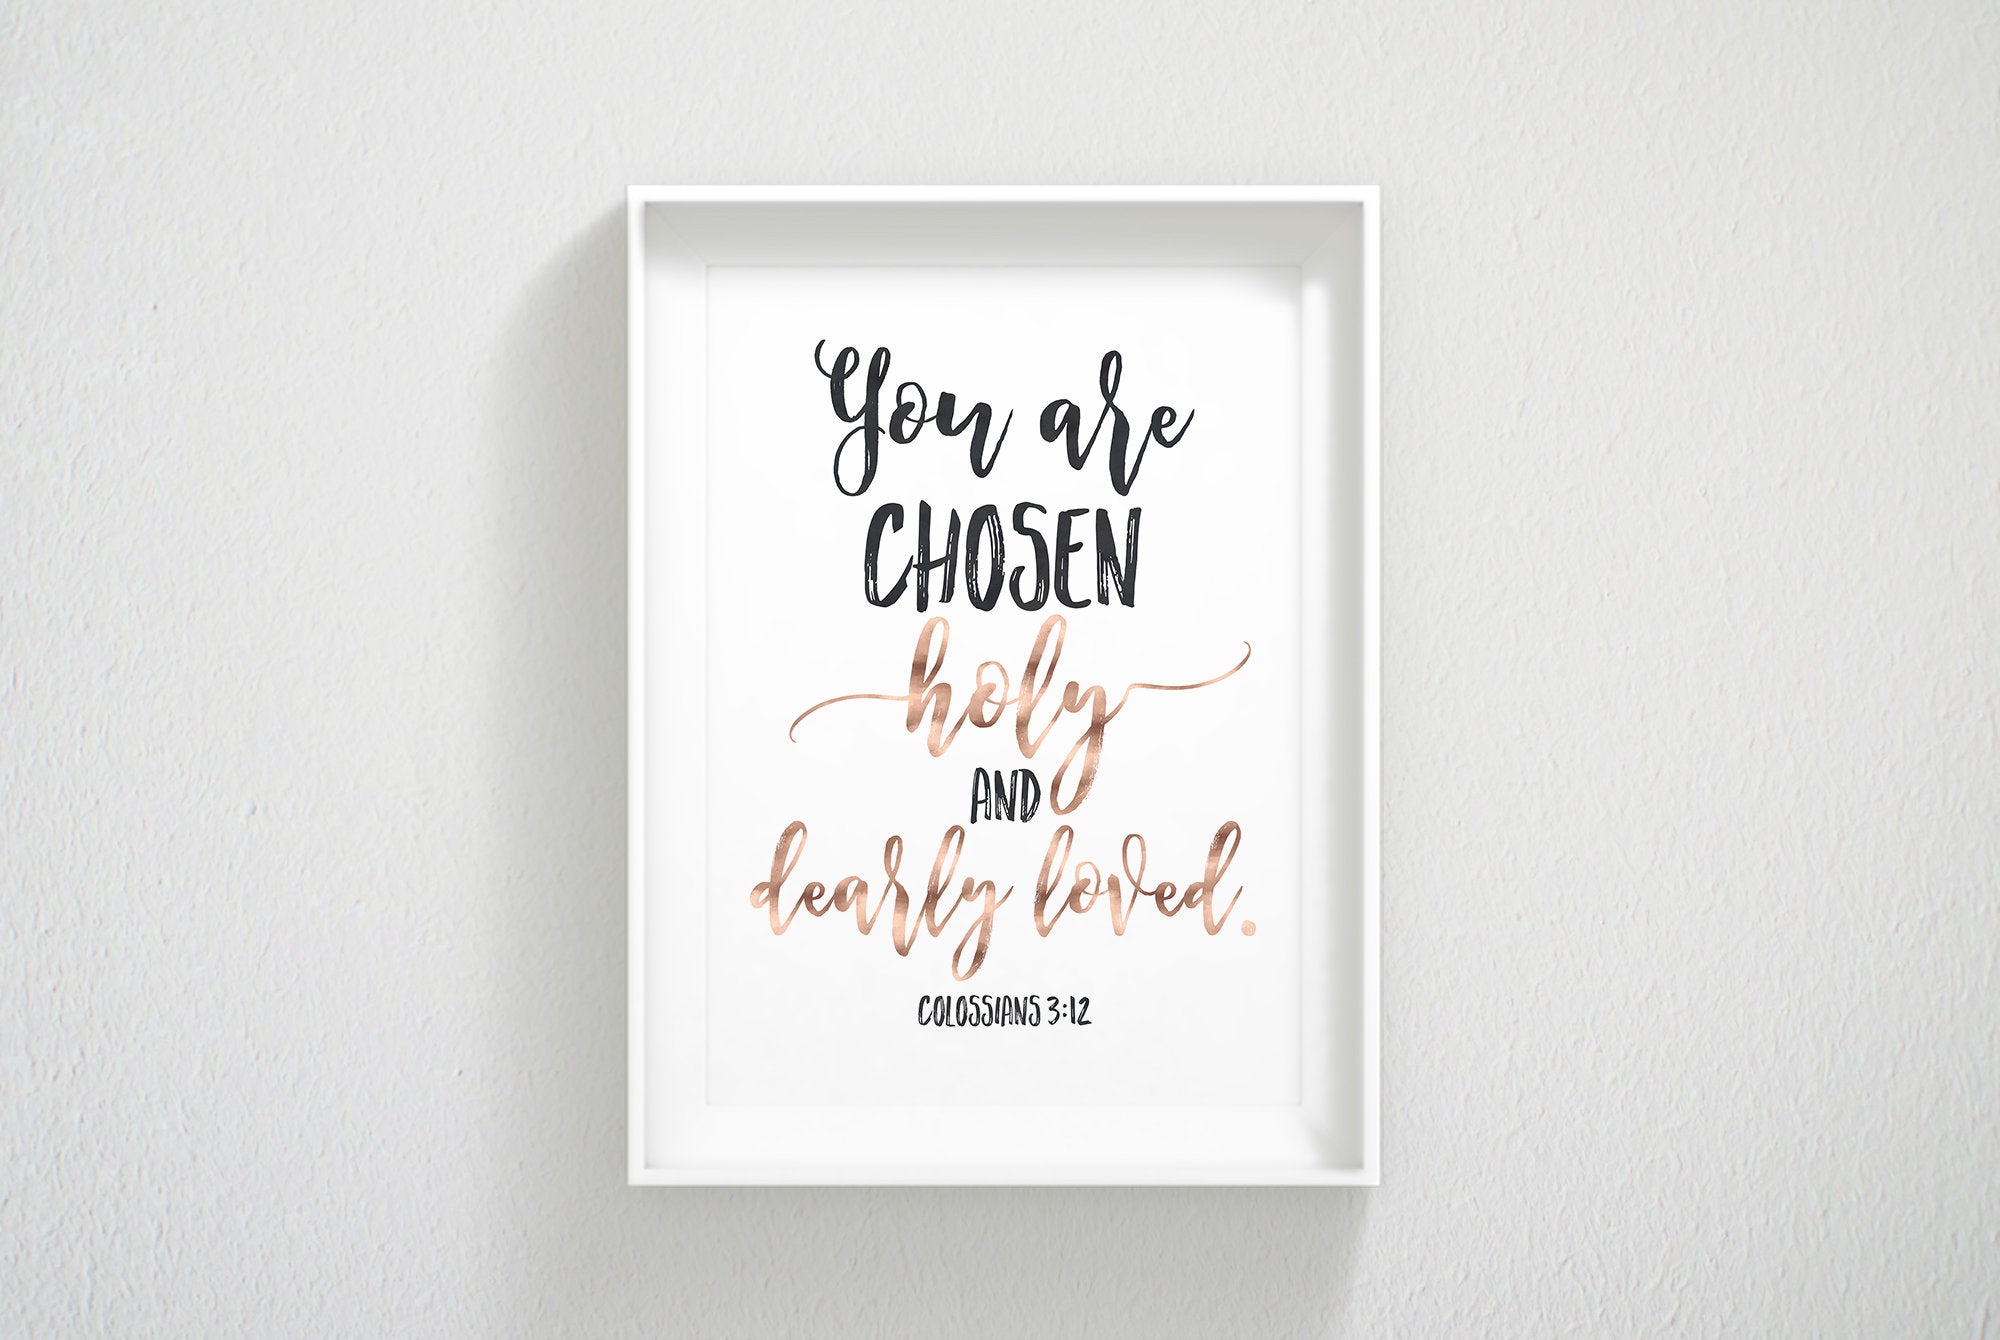 You Are Chosen Holy And Dearly Loved, Colossians 3:12, Catholic Prayer, Bible Verse Printable